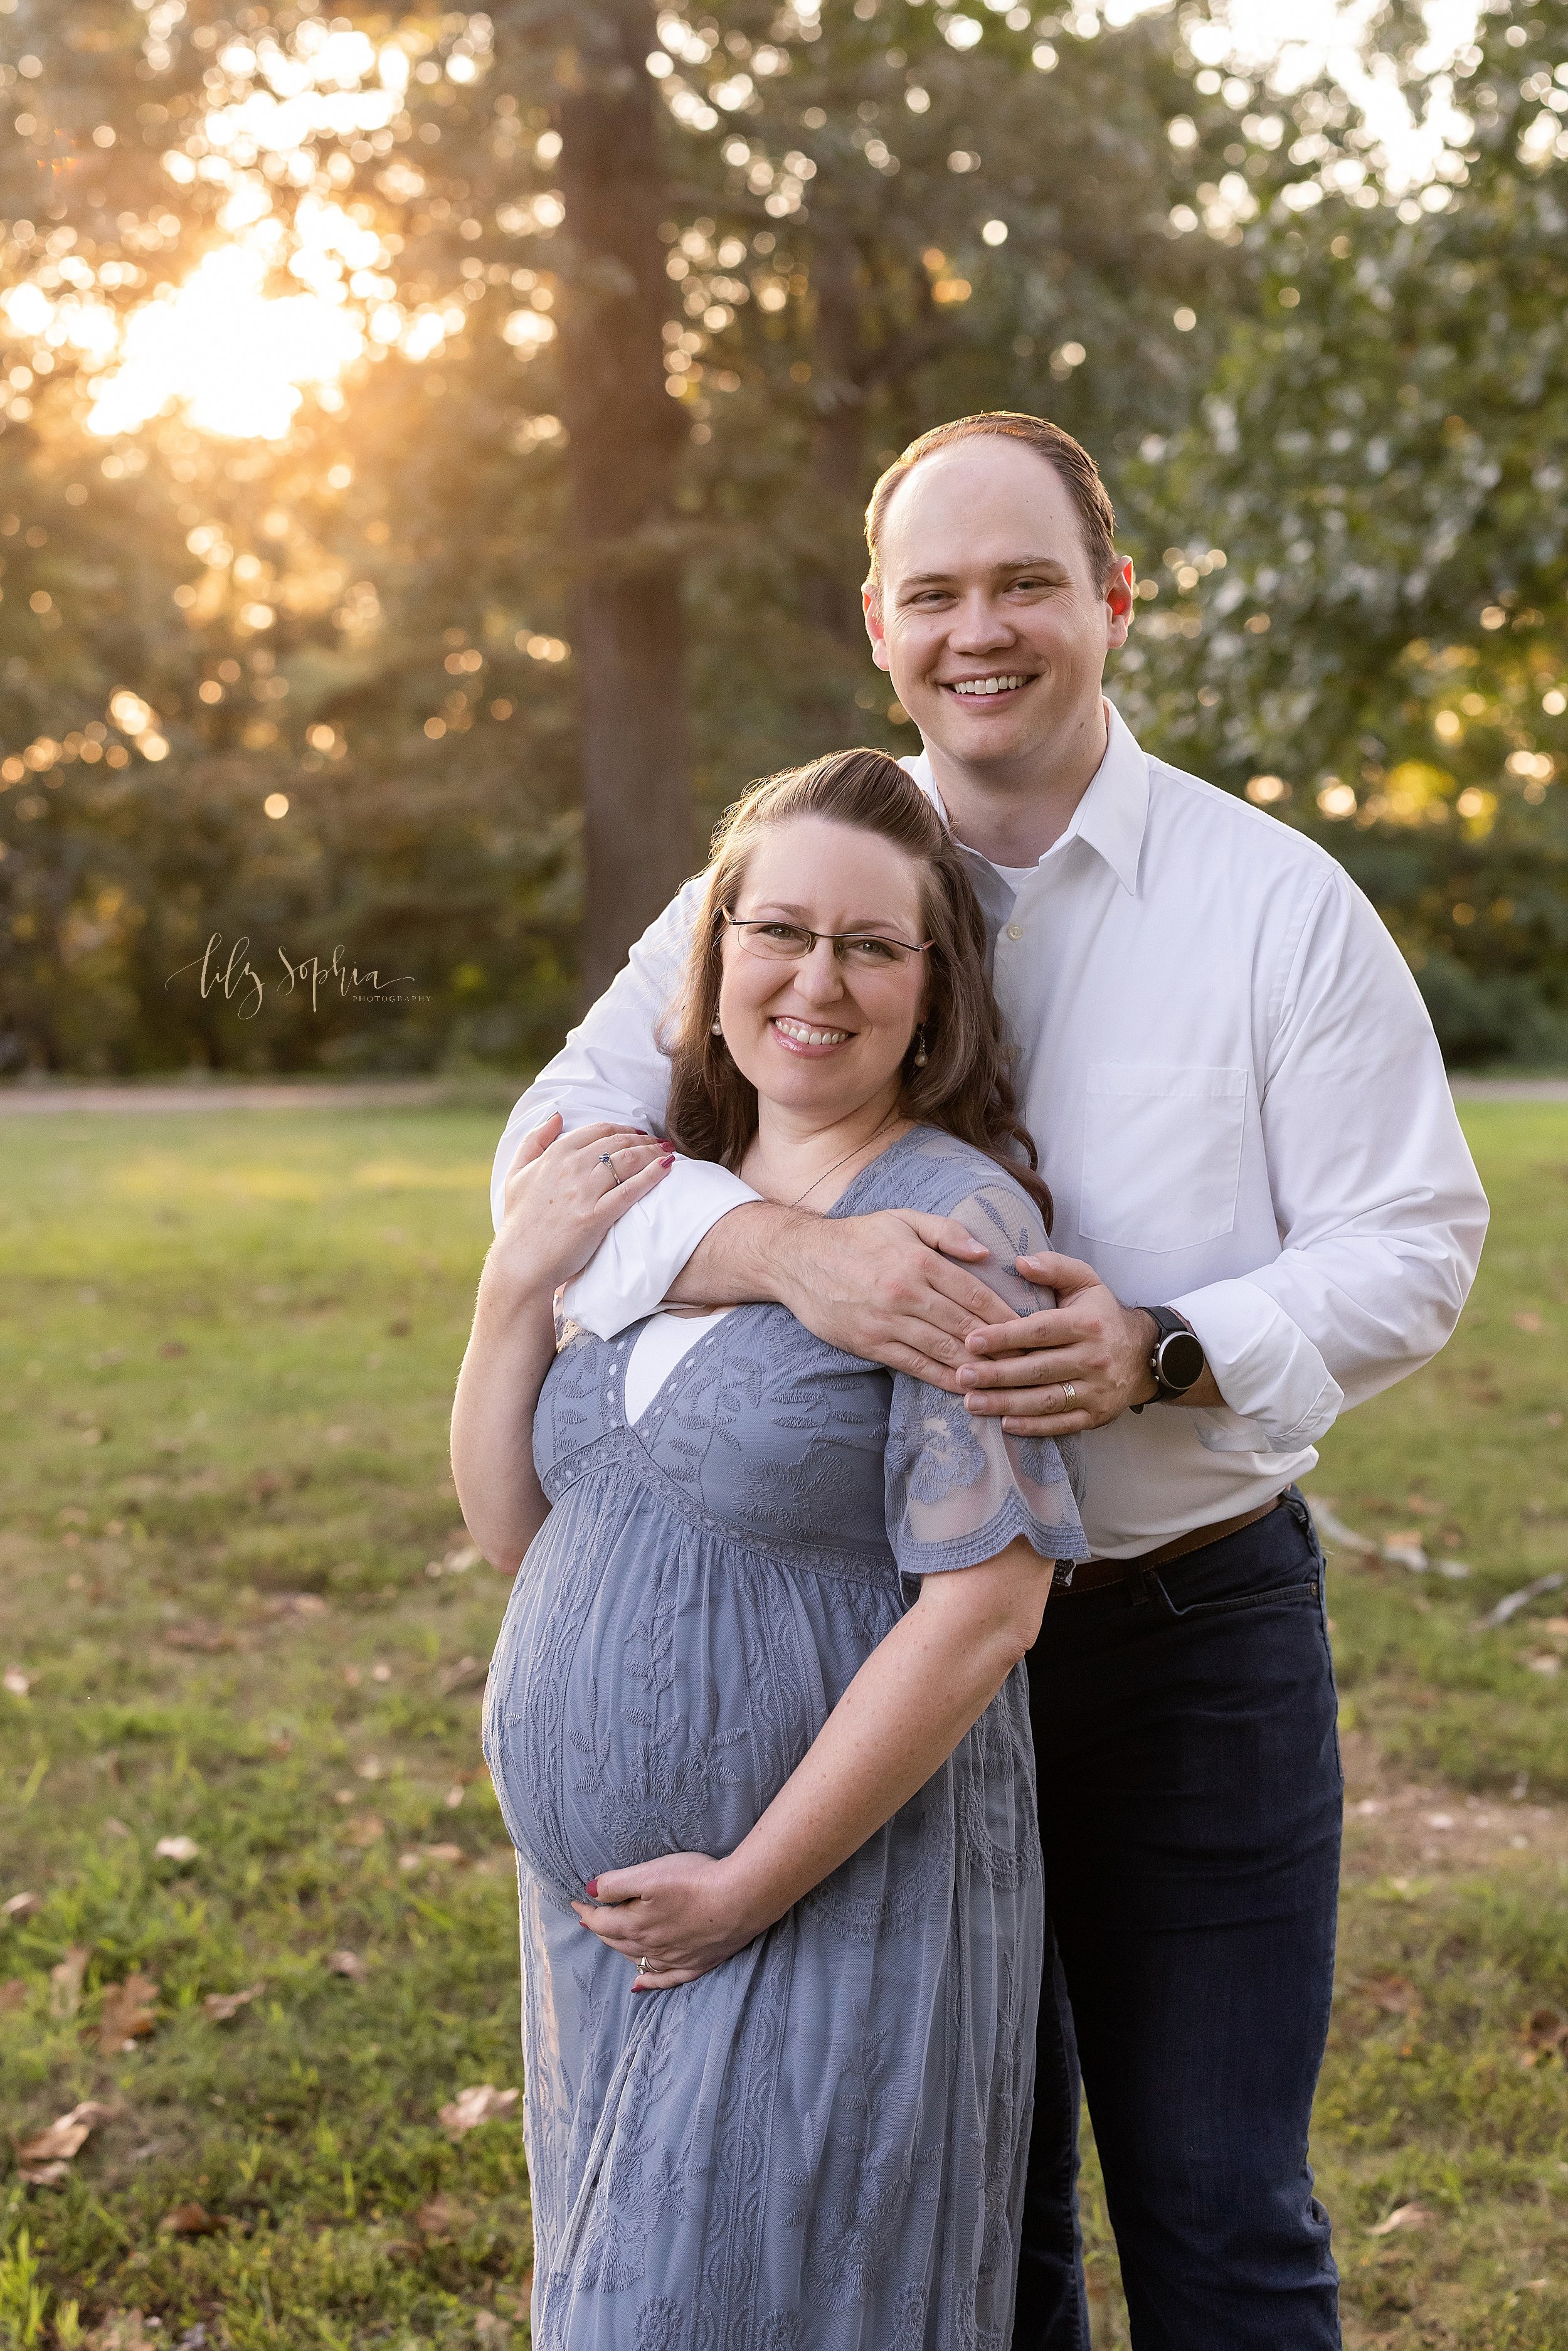  Maternity photo shoot in an Atlanta park with the husband standing behind his wife as he wraps his arms around her shoulders and she holds his arm with her right hand and frames her belly with her left hand as the sunset goes down in the background.